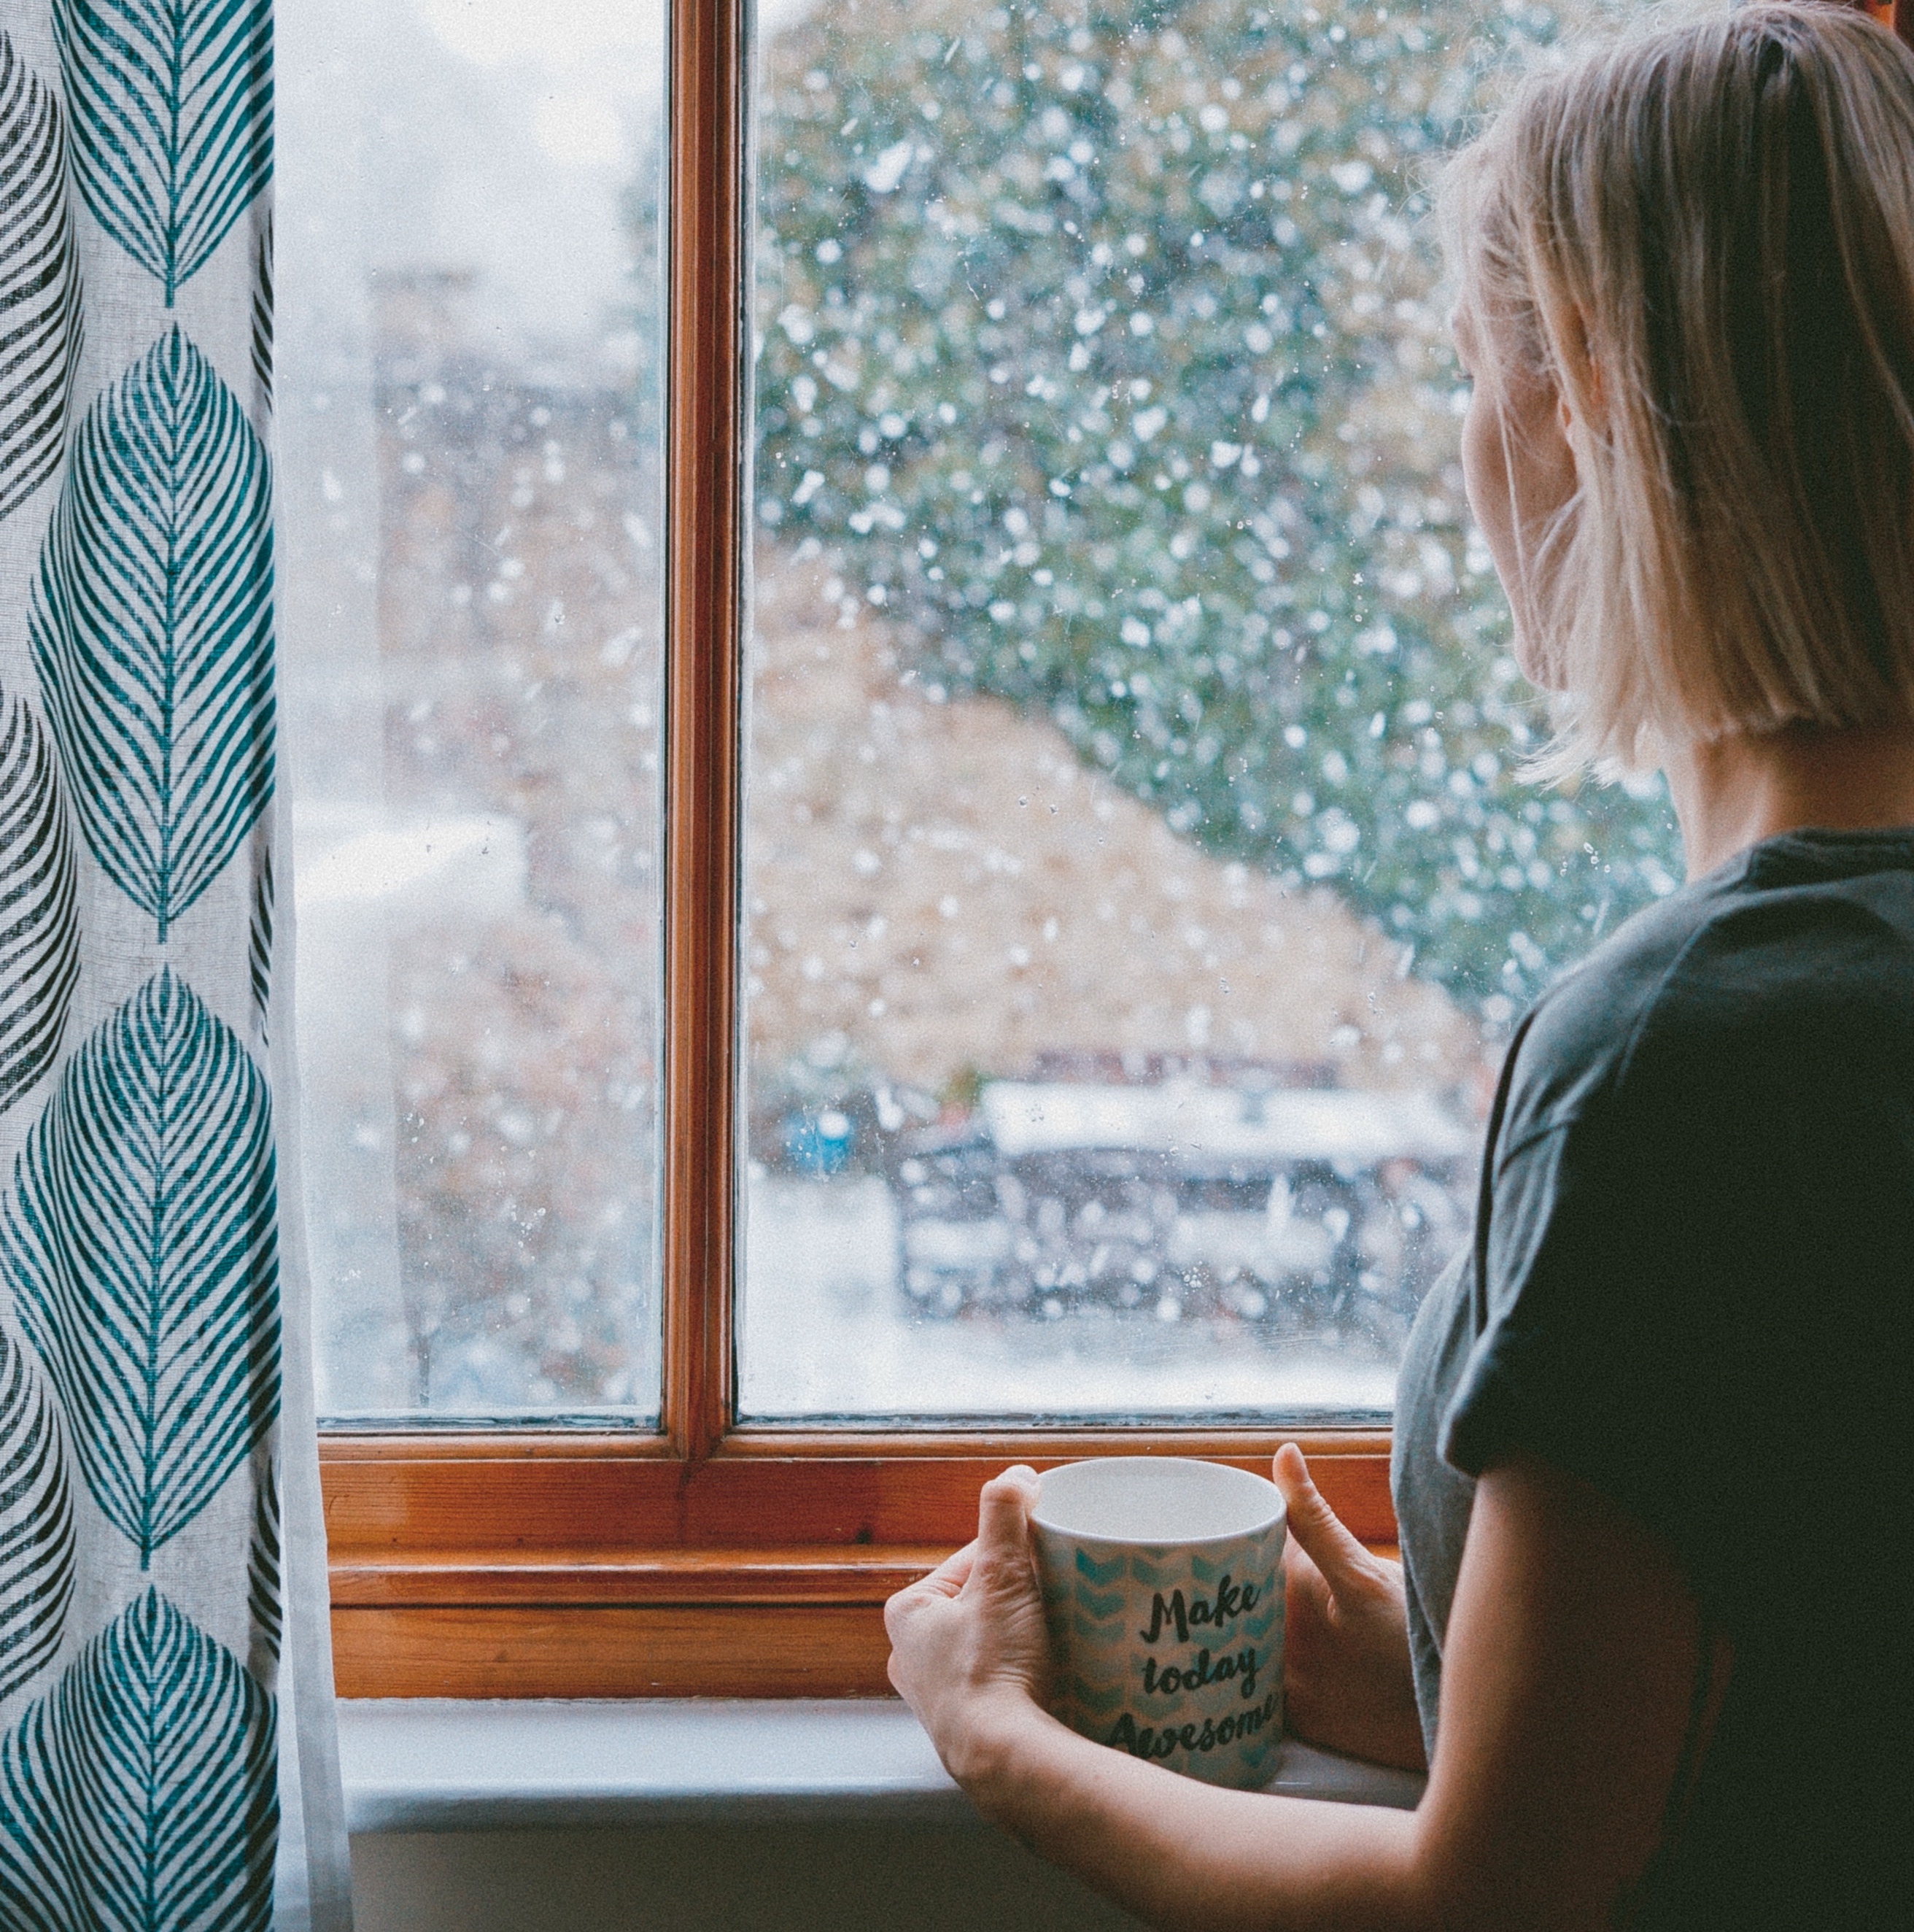 Simple ways to beat the winter blues